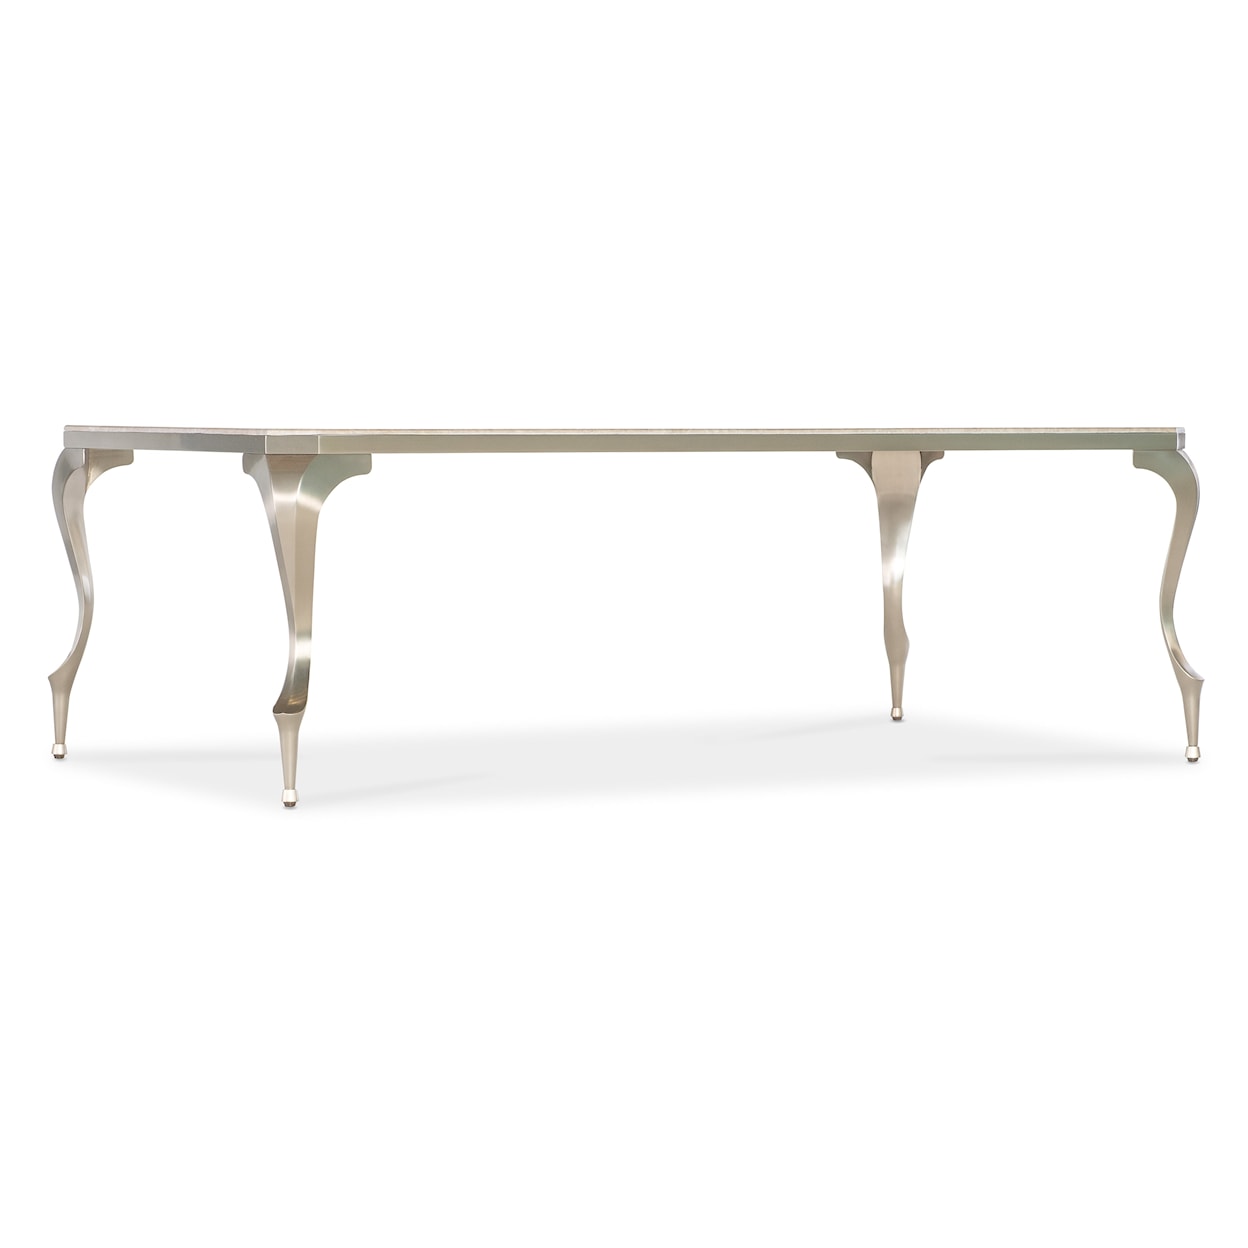 Hooker Furniture Bella Donna Stone Top Cocktail Table